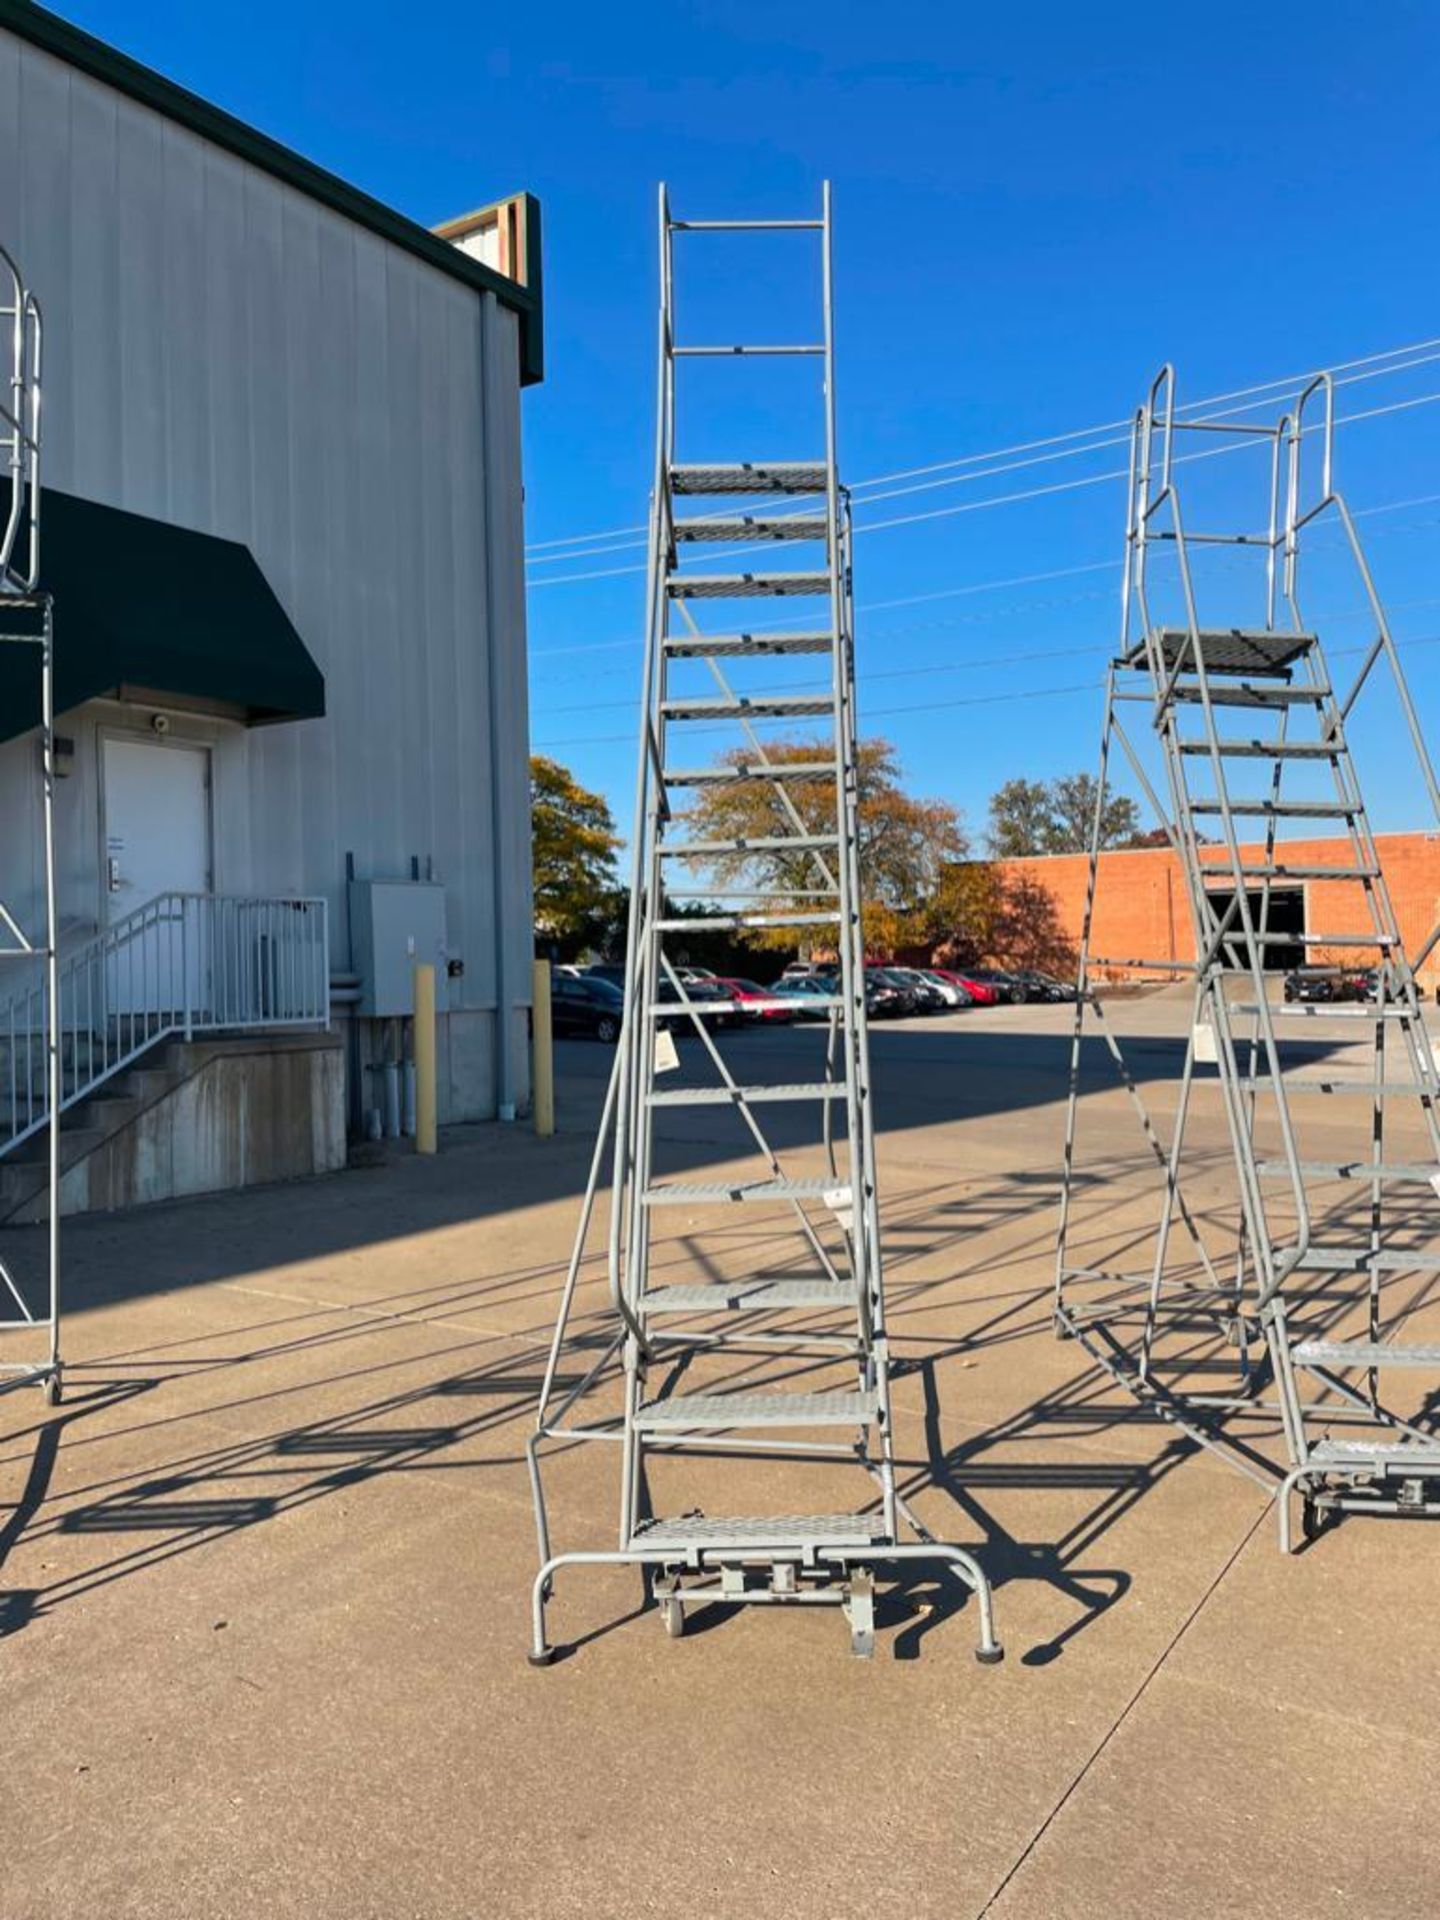 14 Step Rolling Platform Ladder. Located in Hazelwood, MO - Image 2 of 4